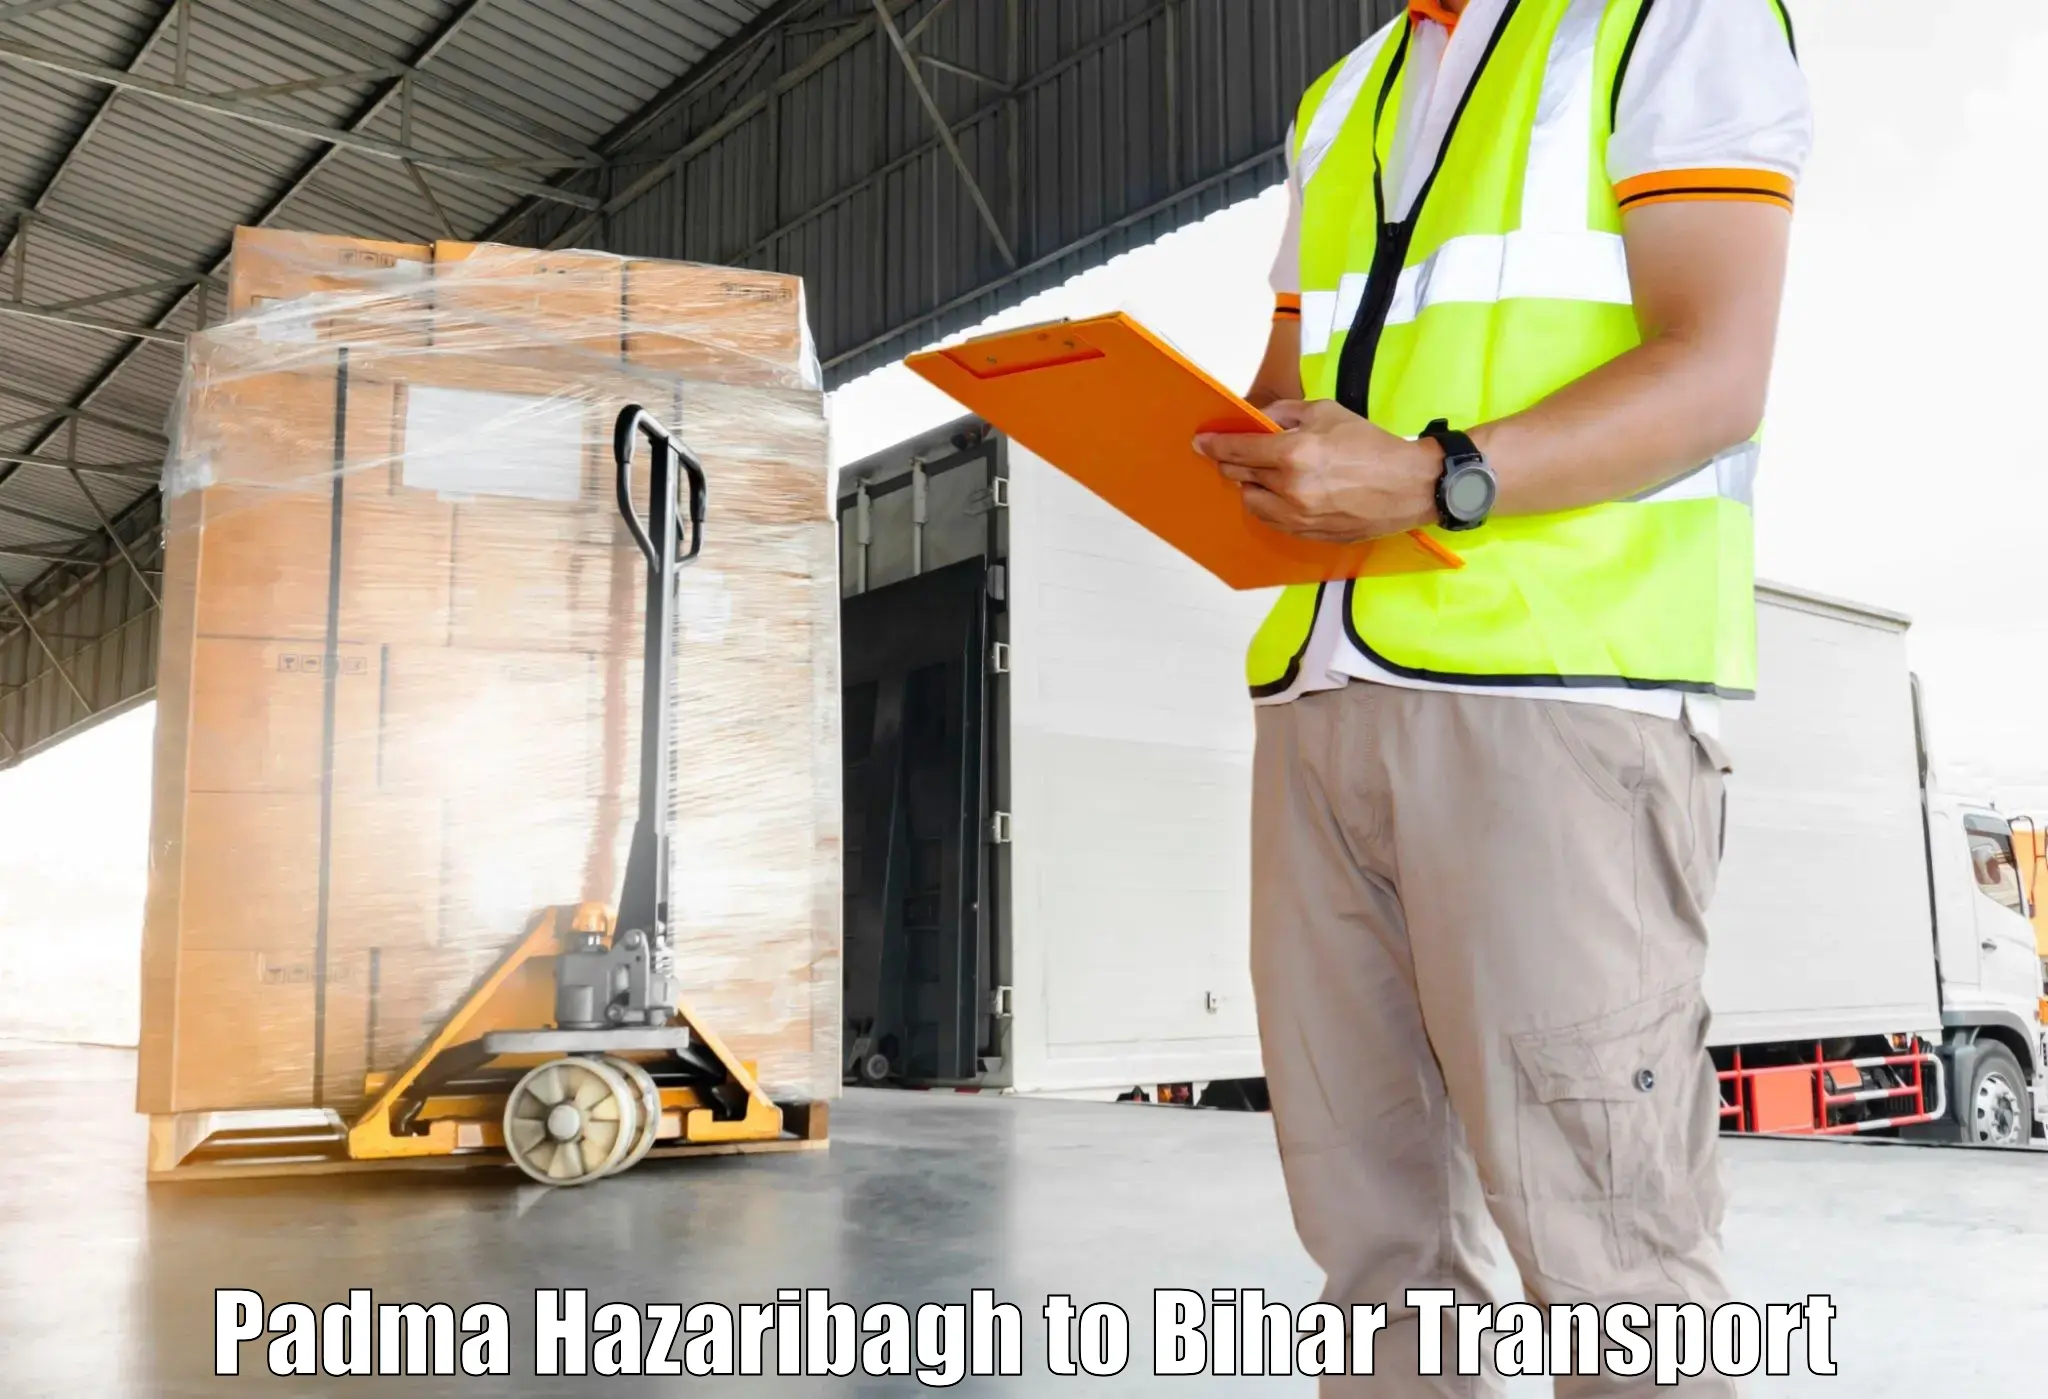 India truck logistics services in Padma Hazaribagh to Dhaka